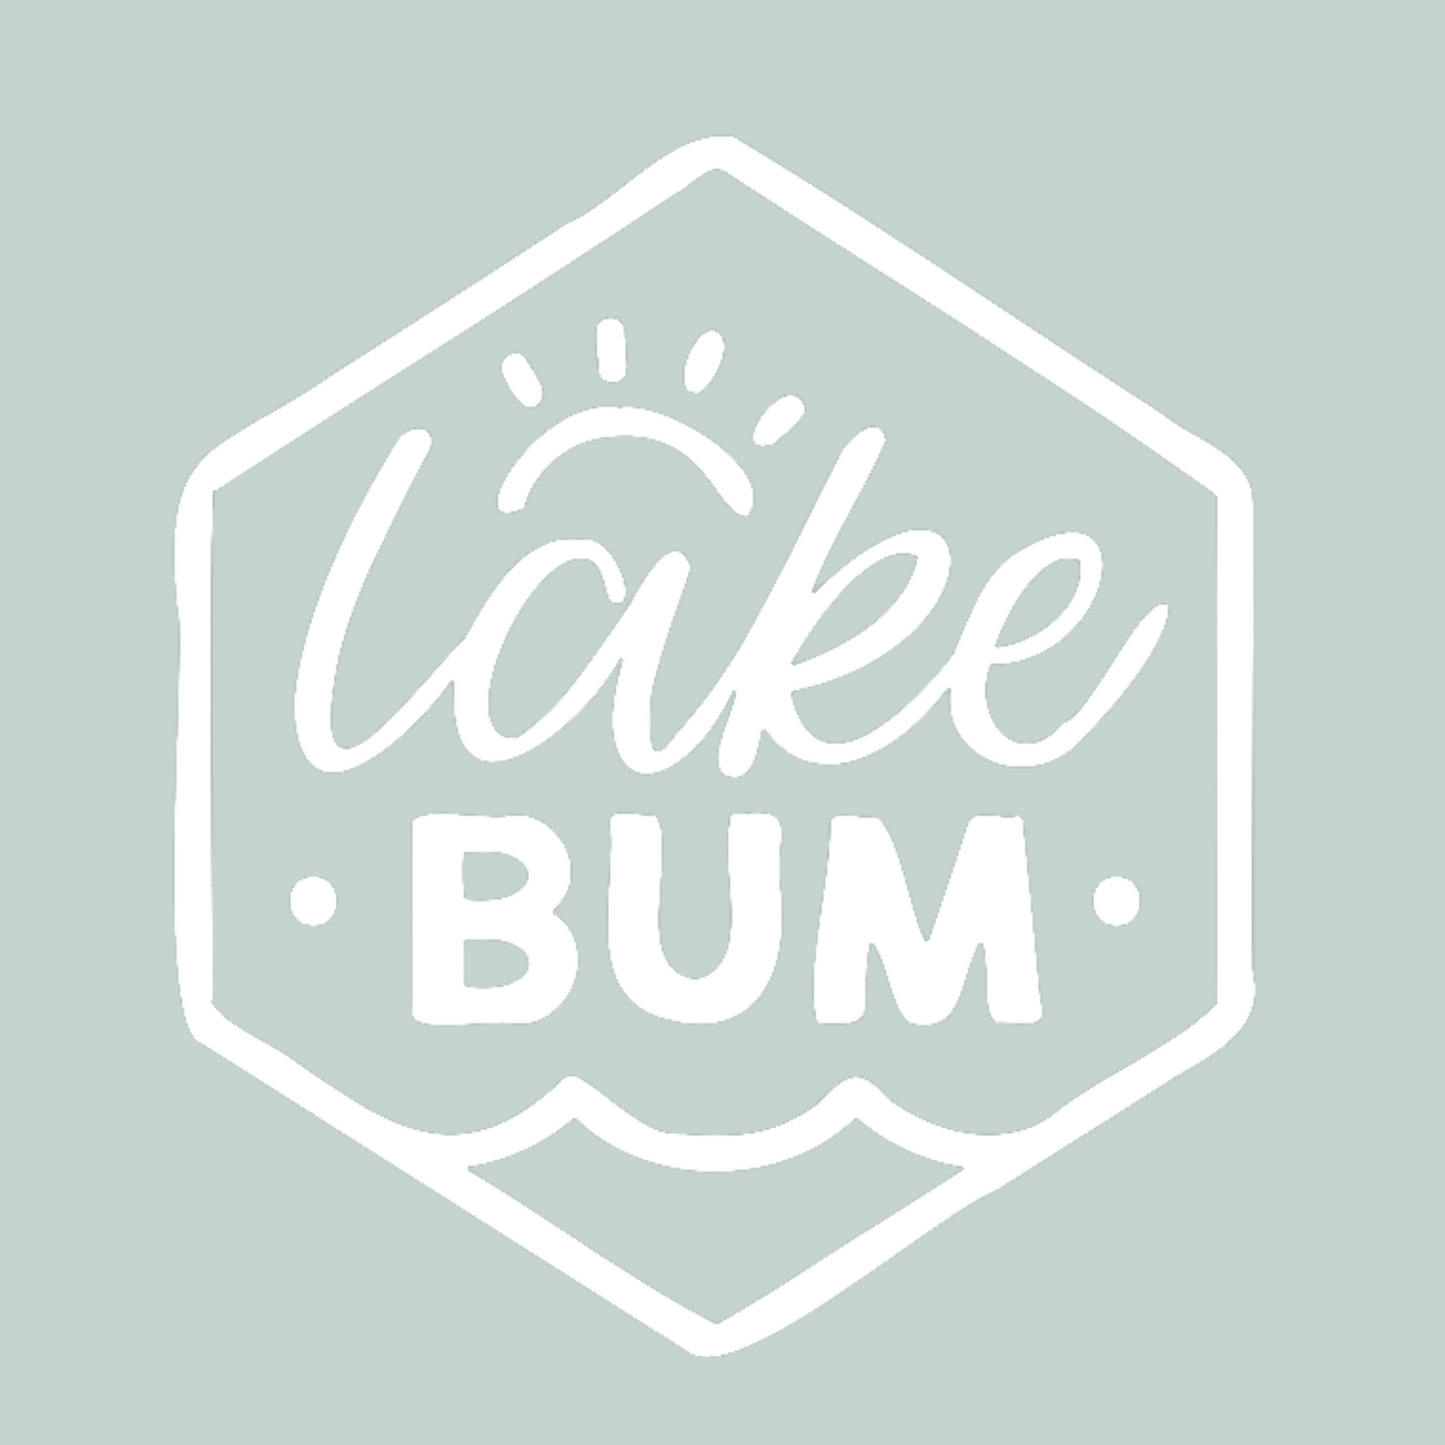 White lake bum sun and waves design on a light green background. This is an unclose view of the design.